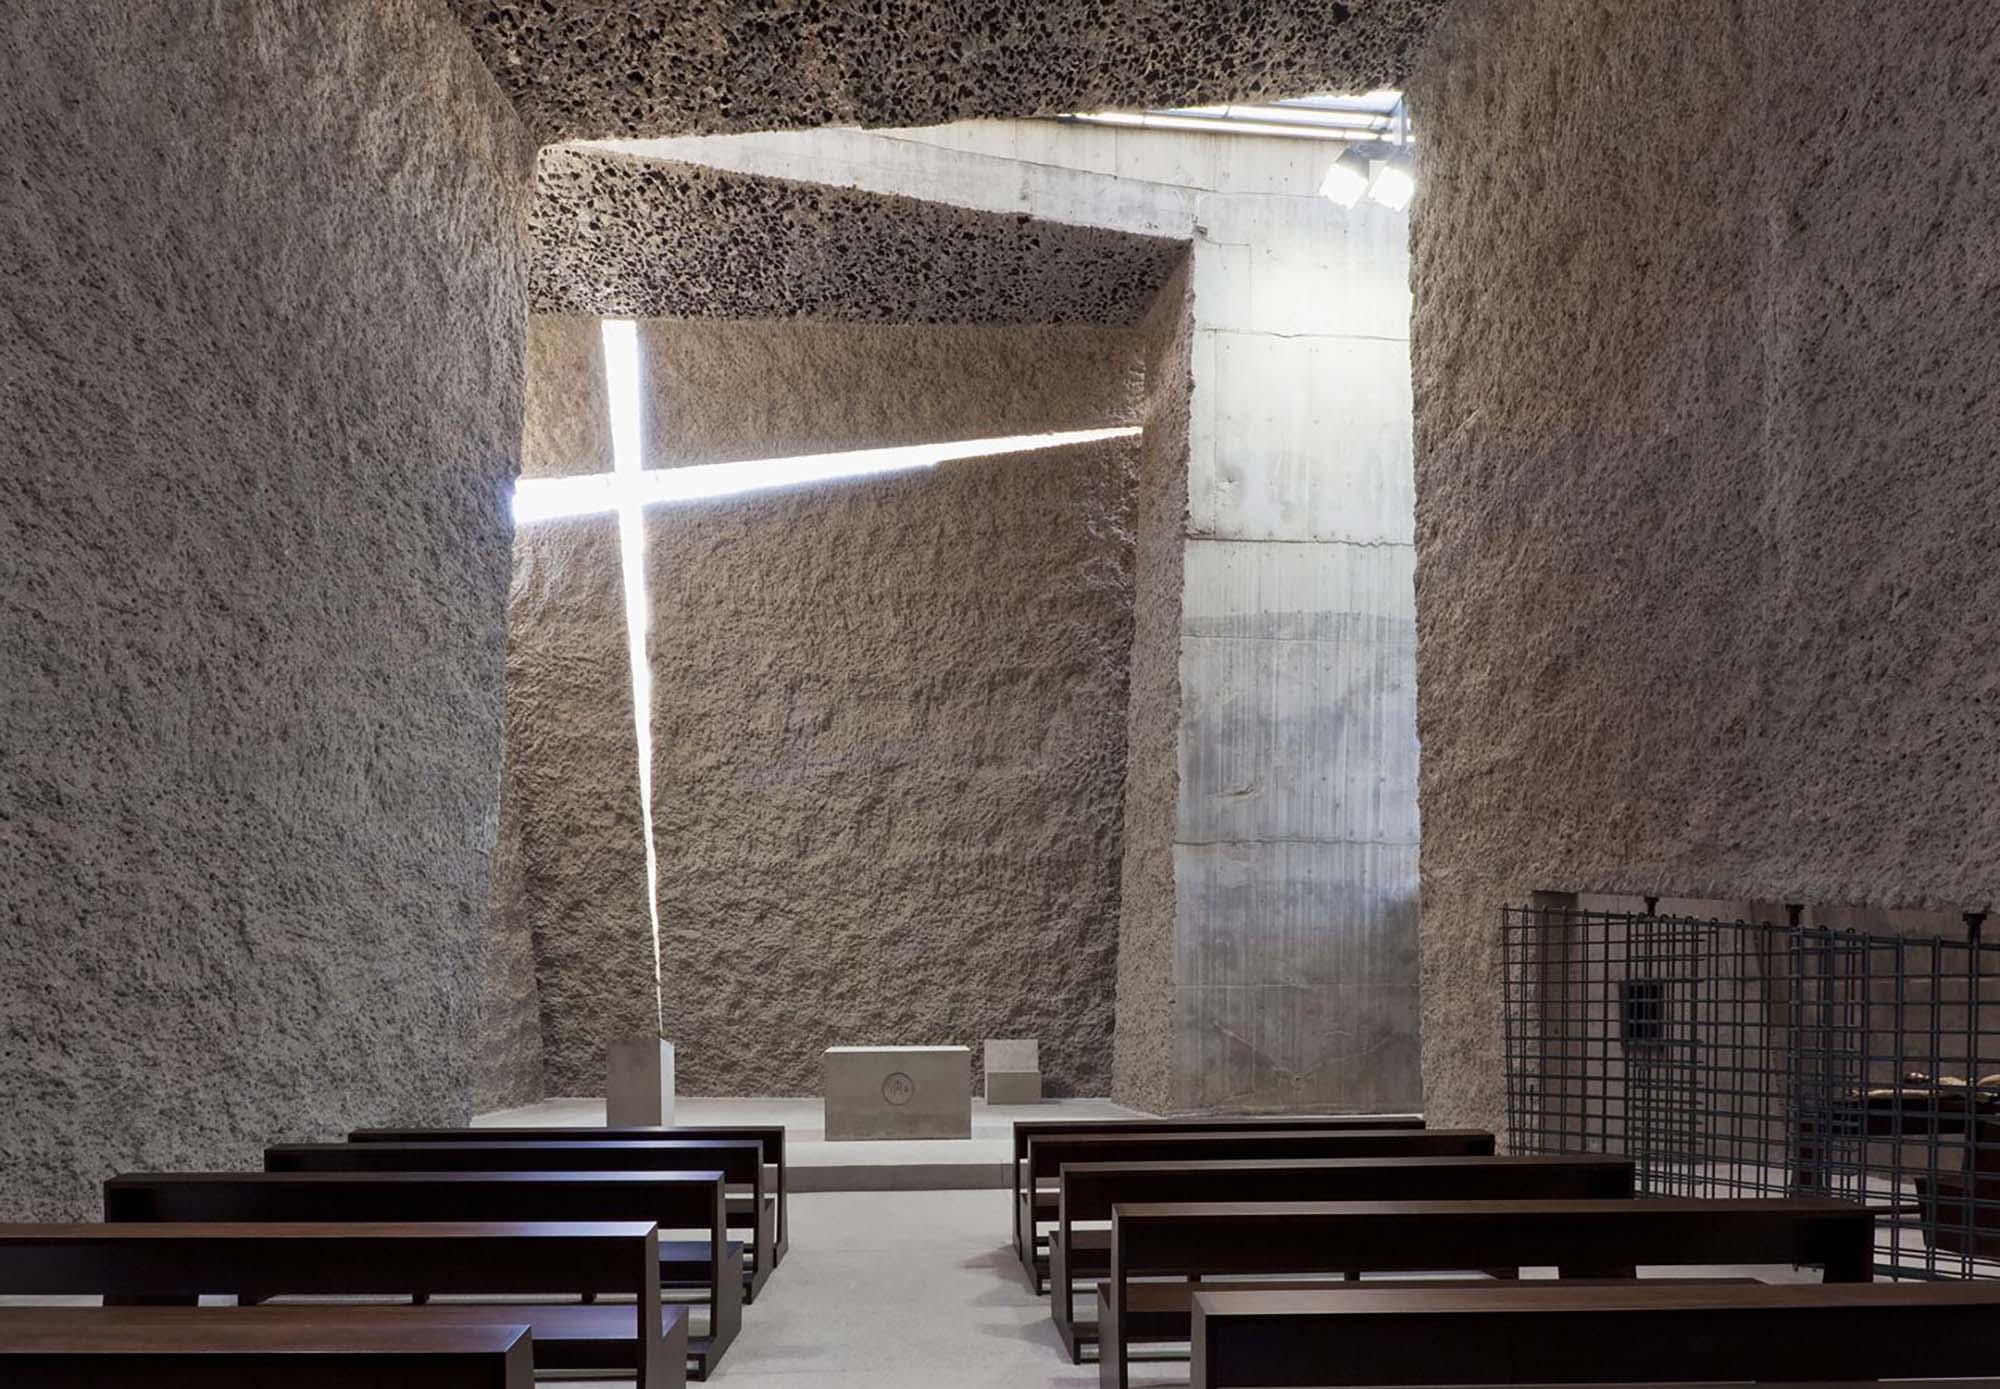 The Holy Redeemer Church and Community Centre of Las Chumberas design by Fernando Menis